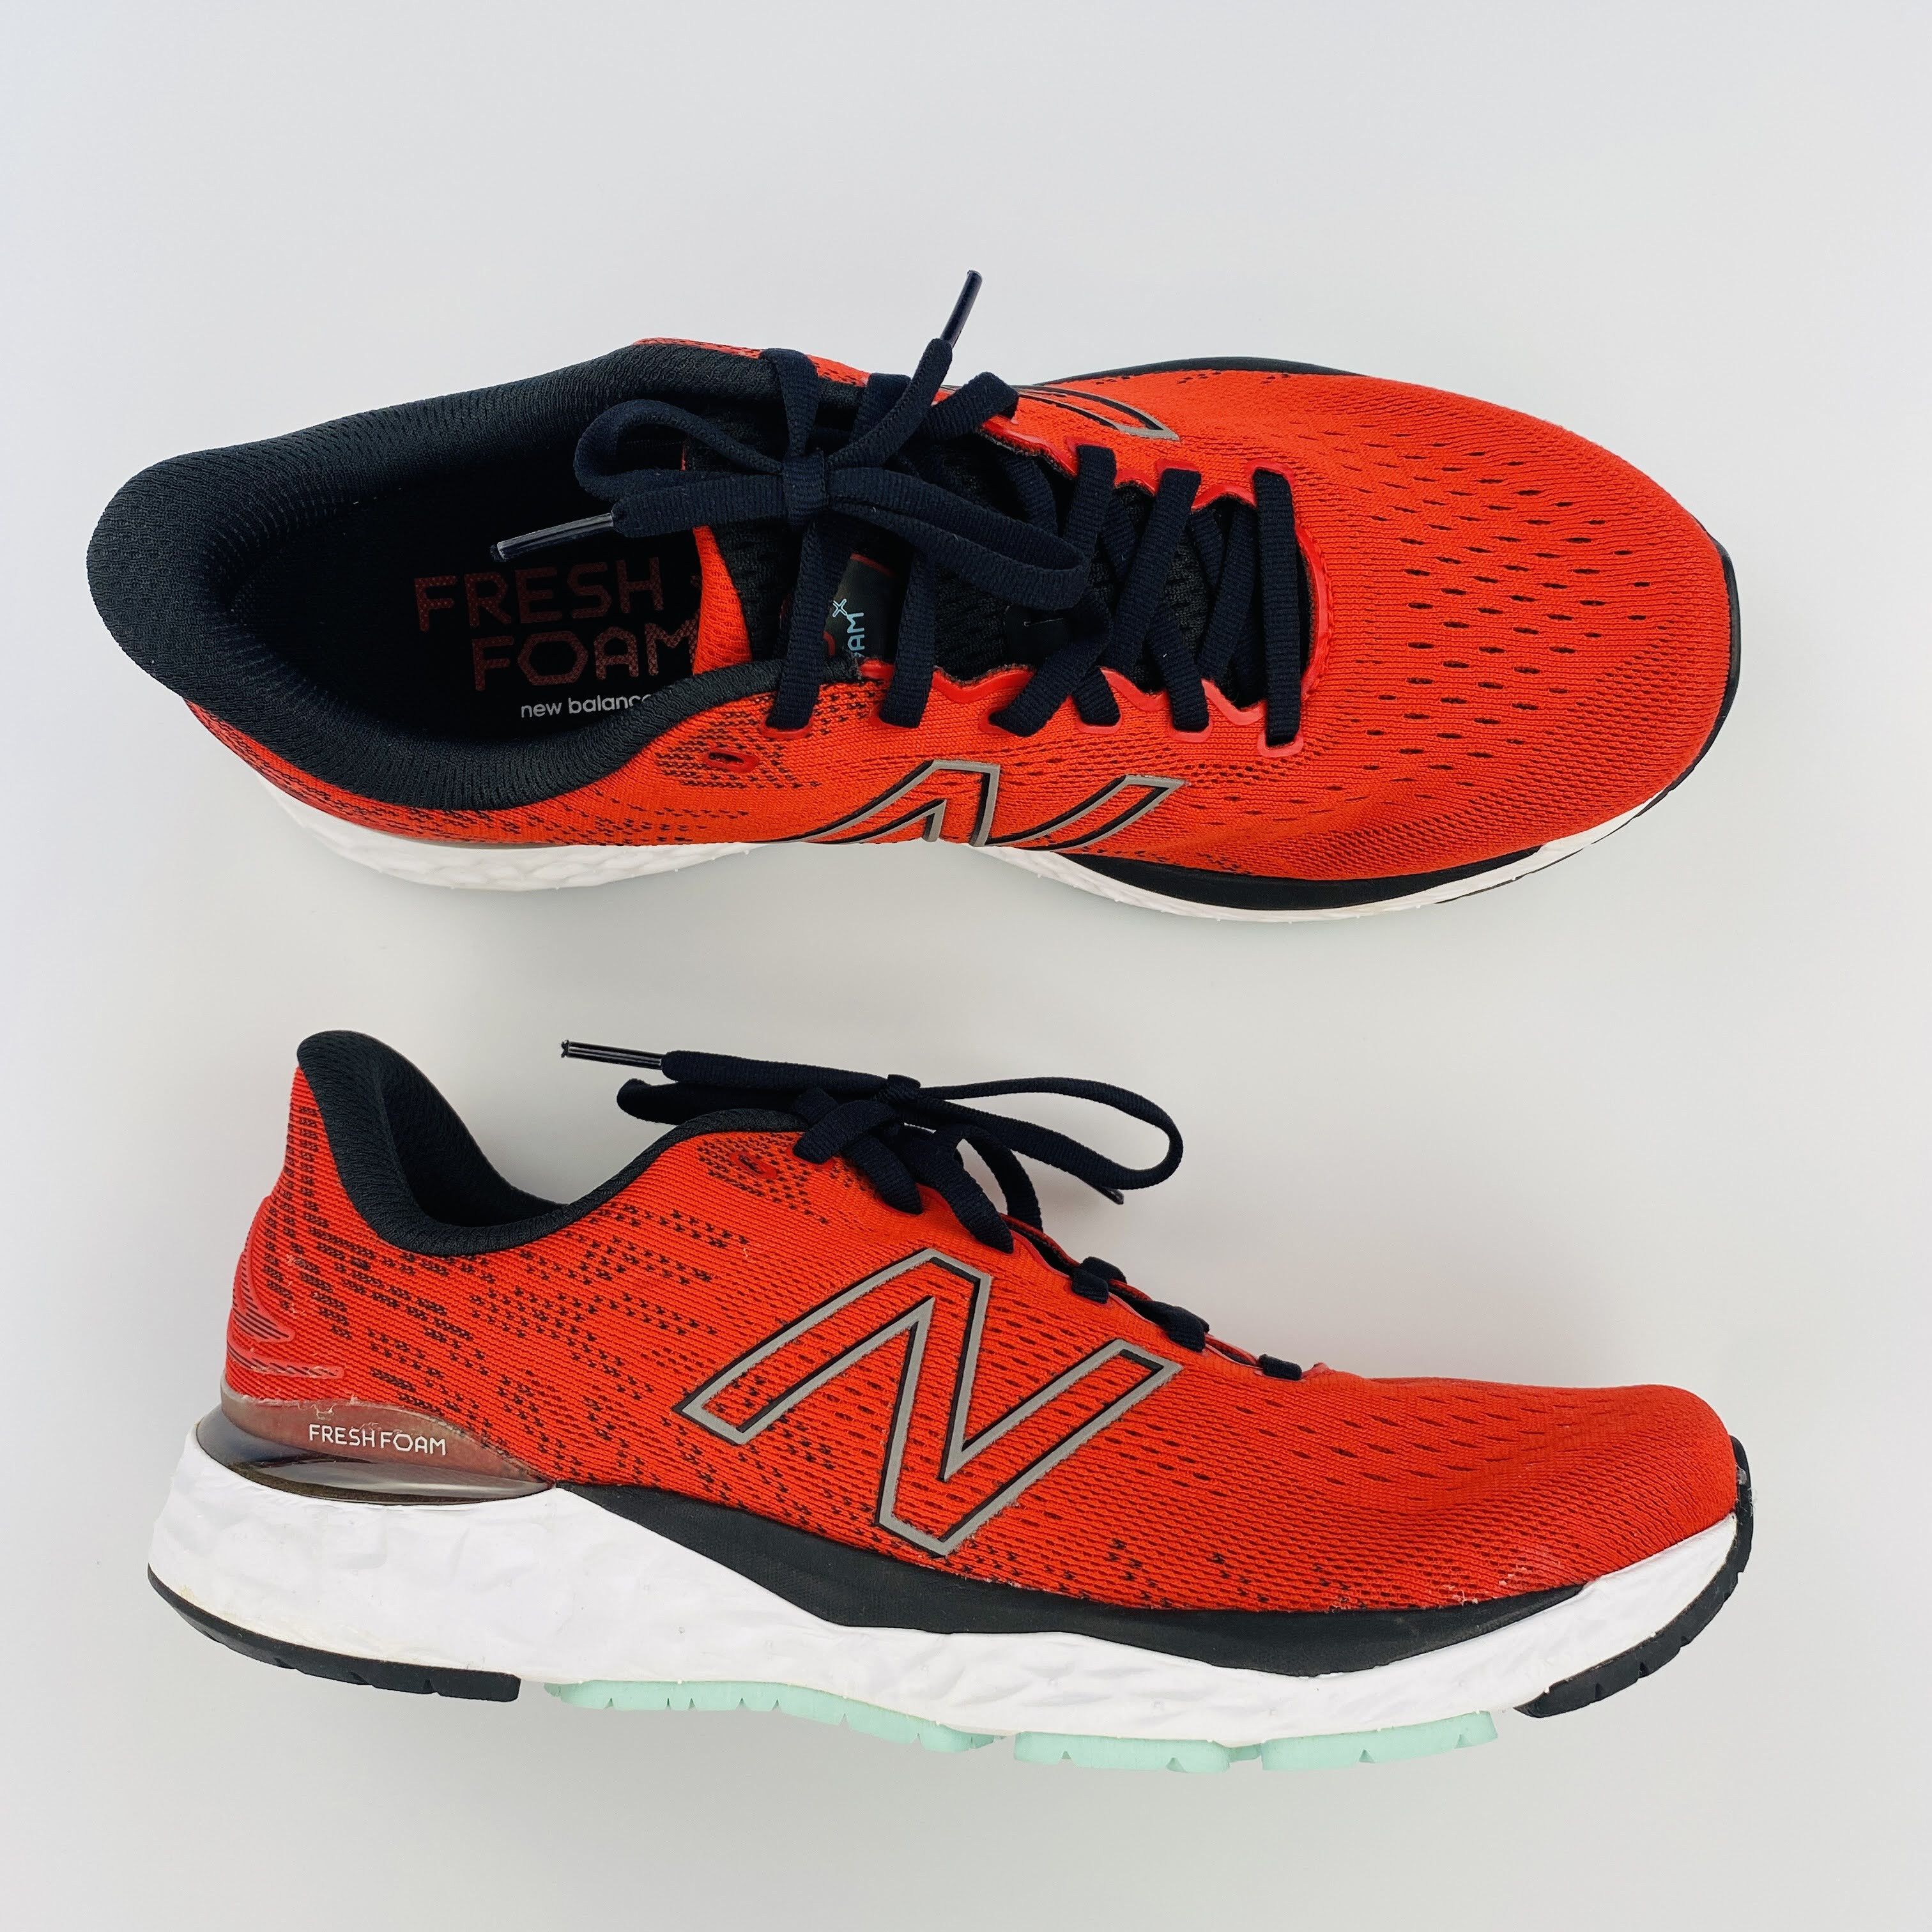 New Balance M 880 R 11 - Seconde main Chaussures running homme - Rouge - 44 | Hardloop